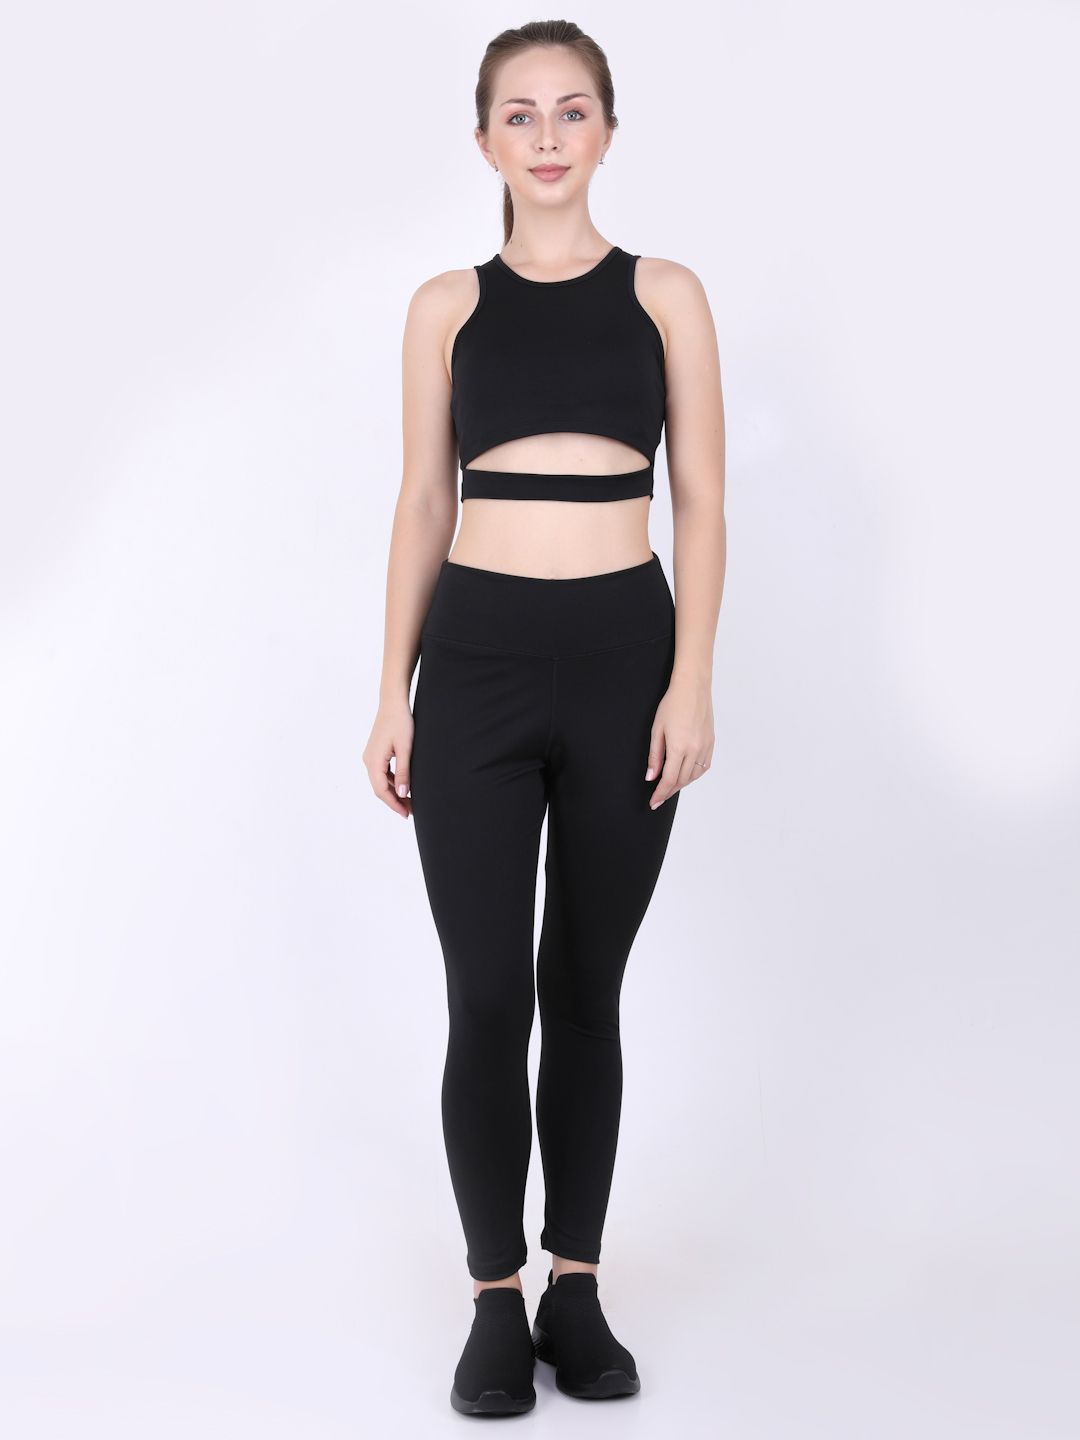 EVERDION Women Black Crop Tank Top With Tights Price in India